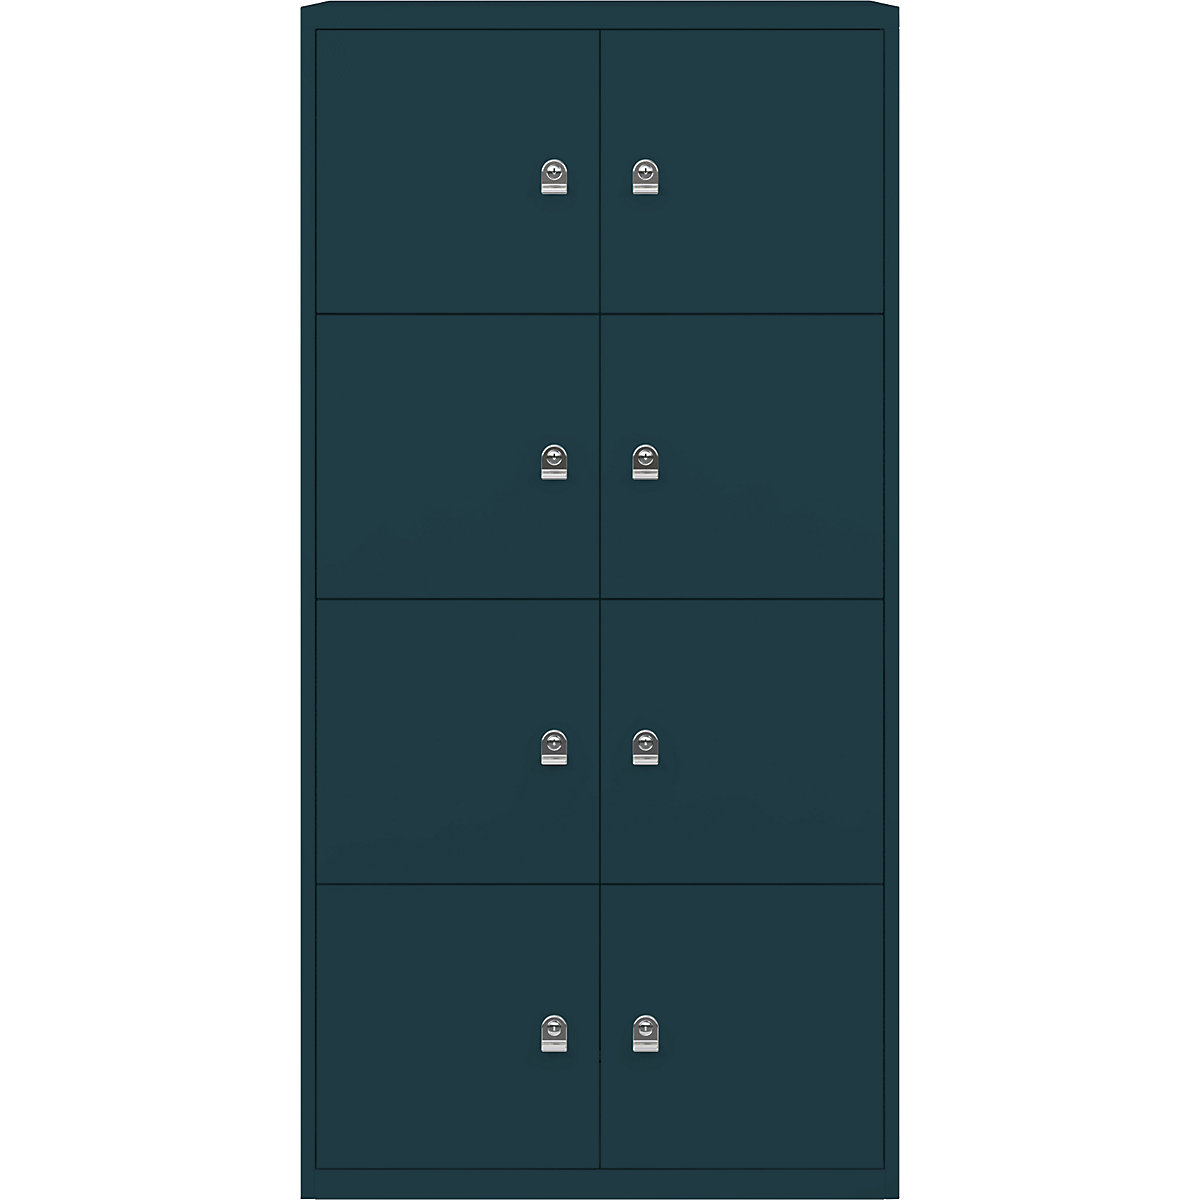 BISLEY – LateralFile™ lodge, with 8 lockable compartments, height 375 mm each, ocean